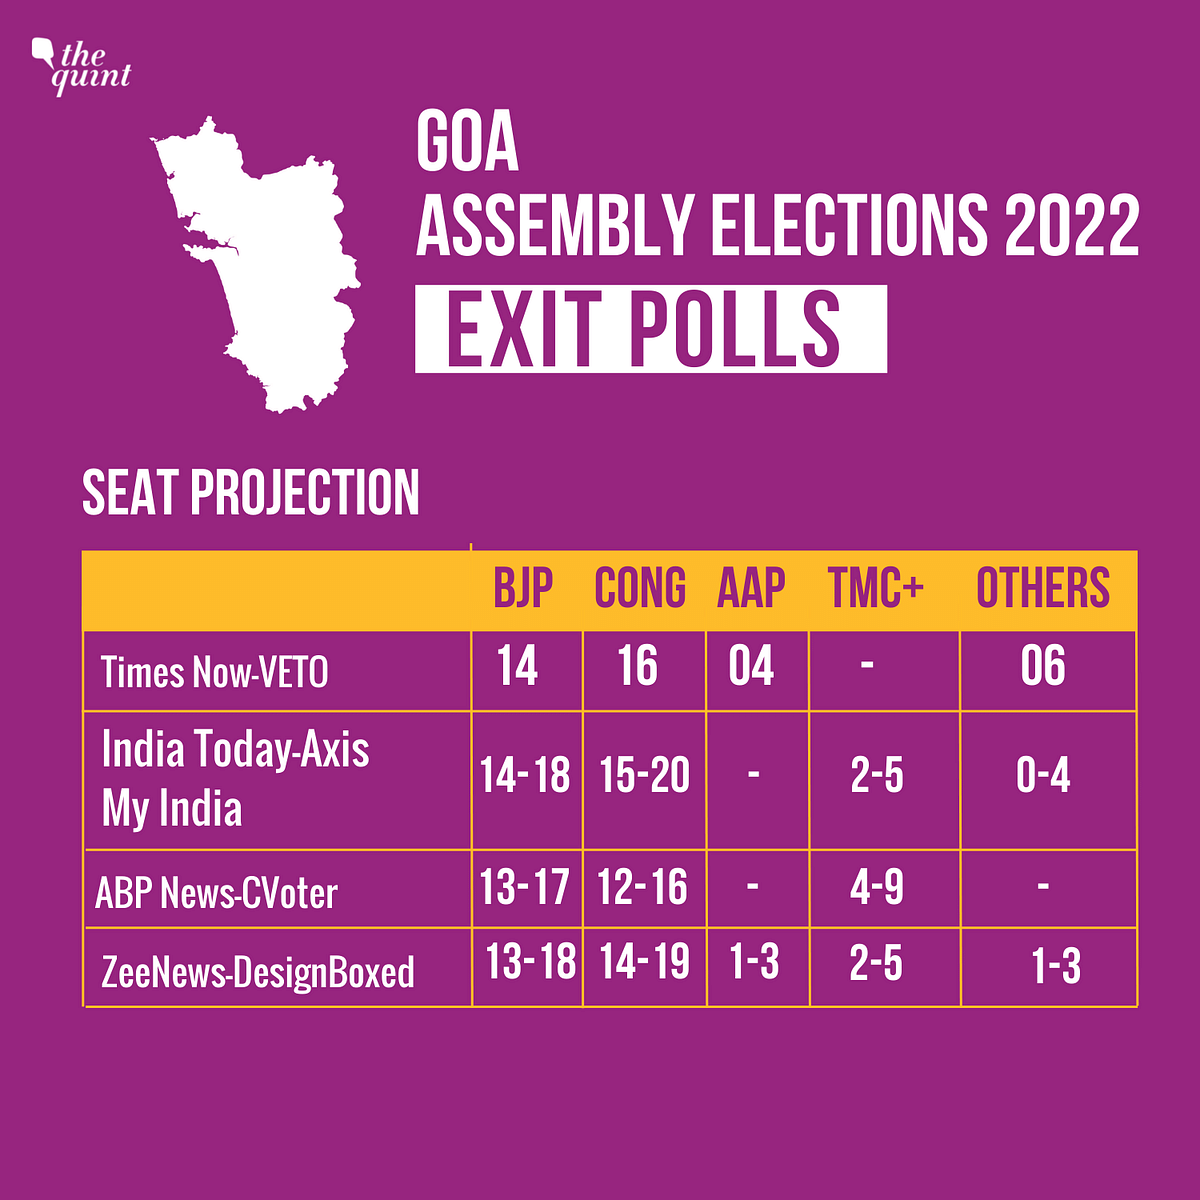 Catch the exit poll results for the Goa Assembly elections here.